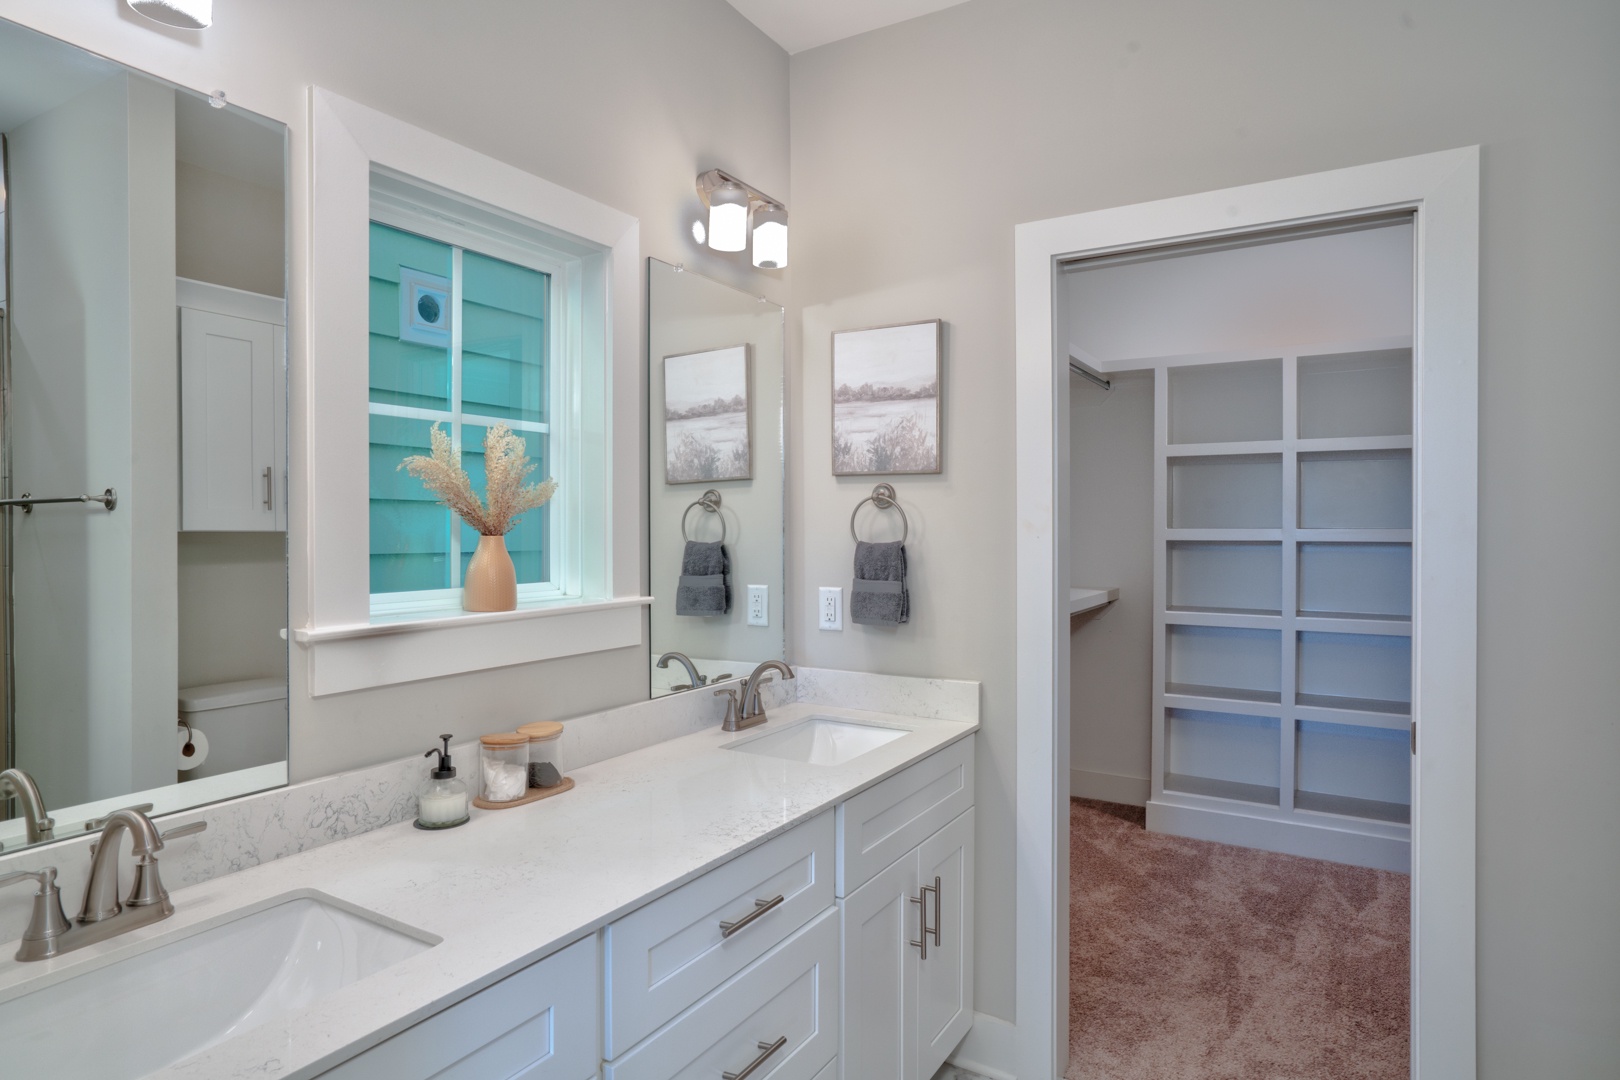 This 3rd floor ensuite includes a dual vanity, glass shower, & walk-in closet